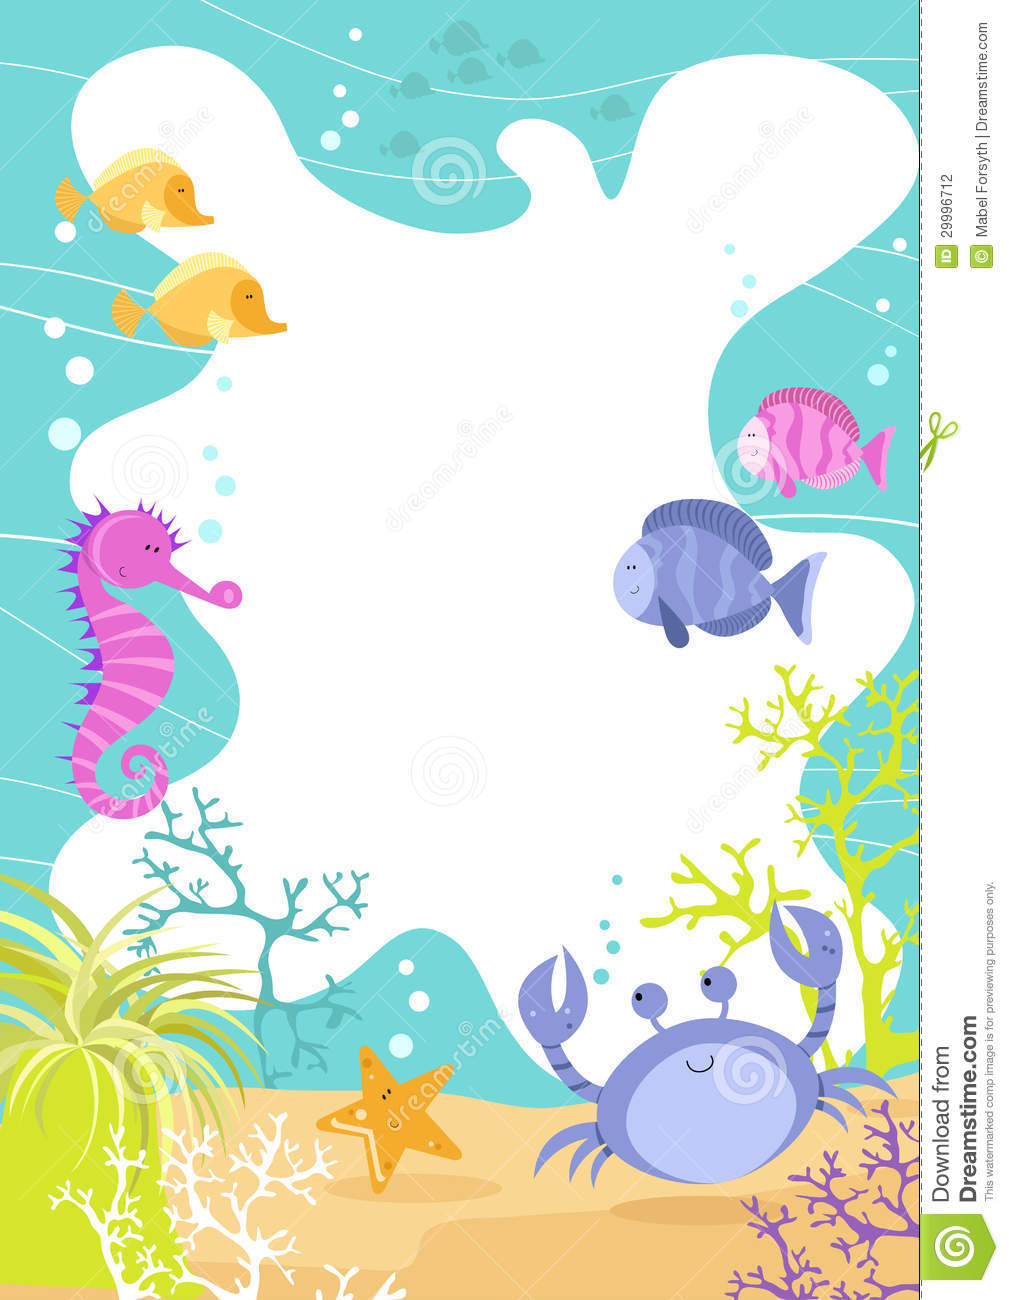 Top Under The Sea Border Image For